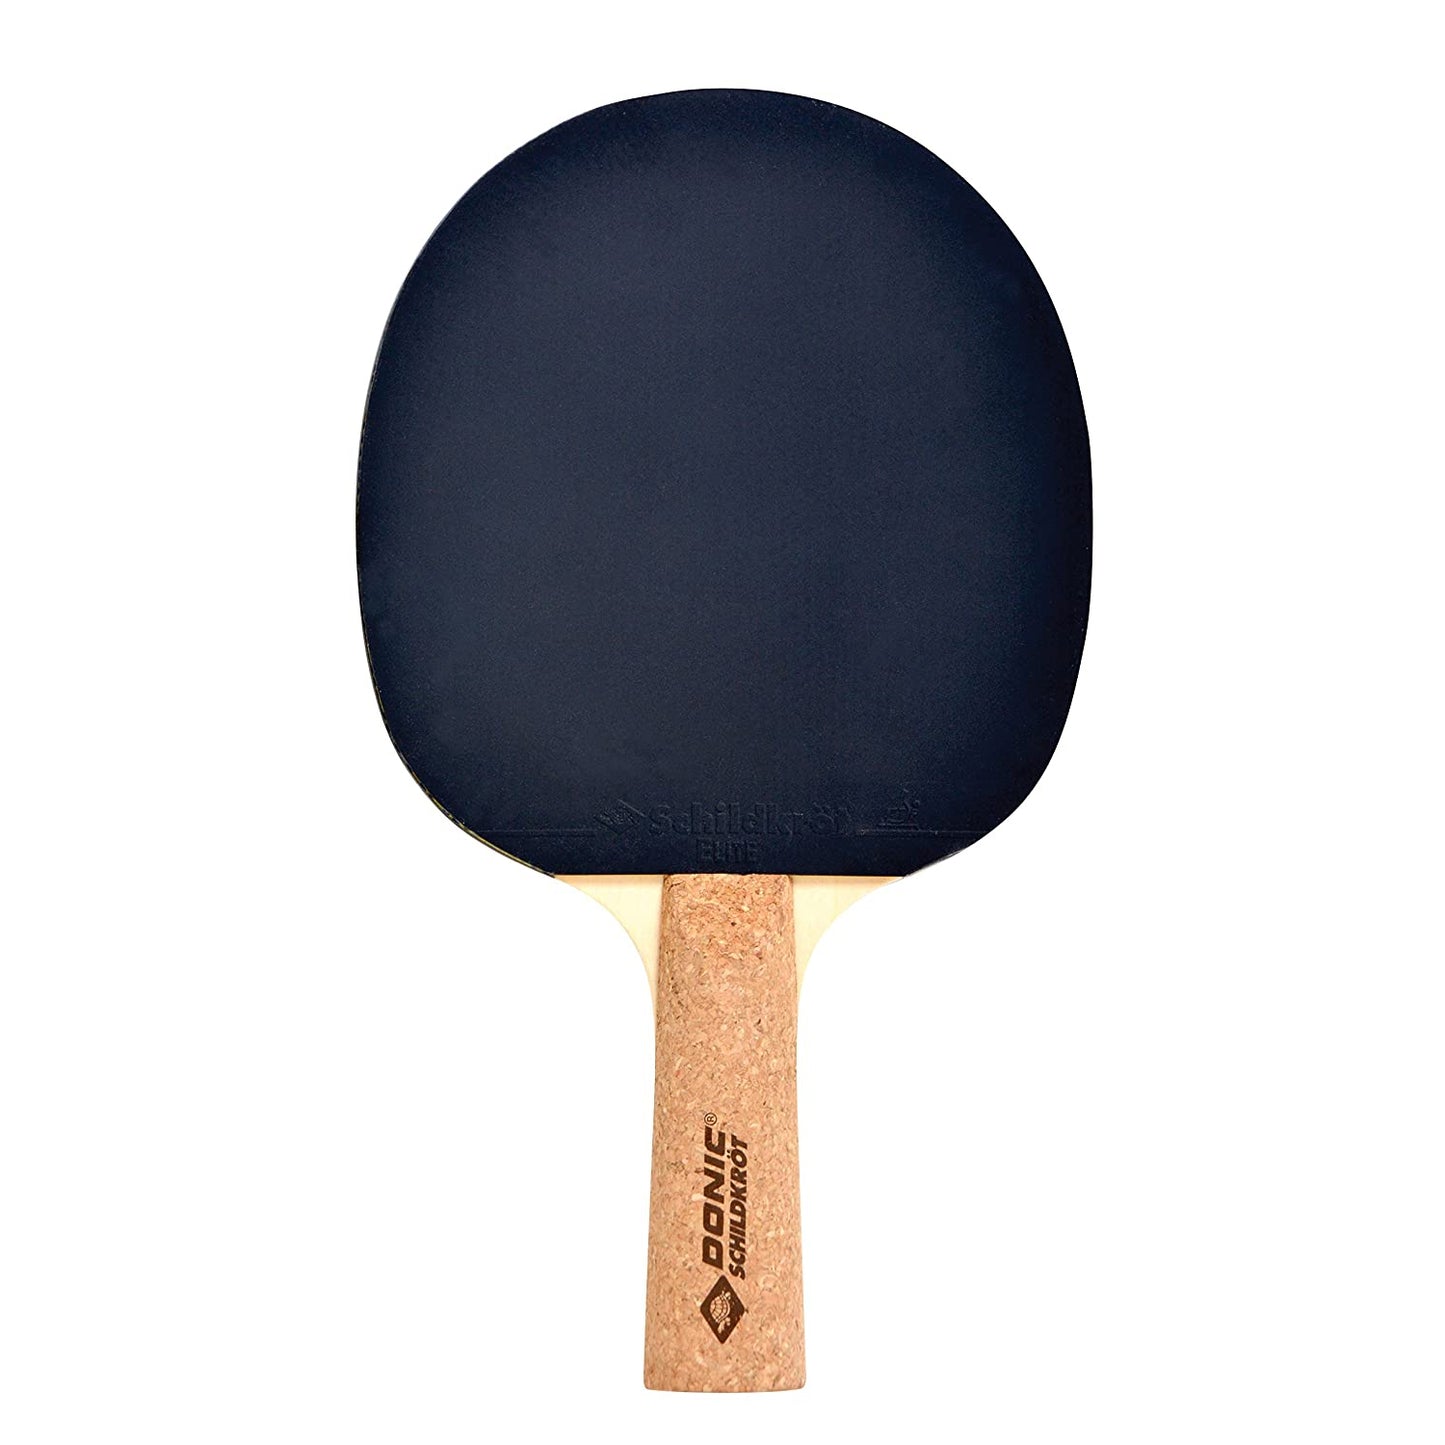 Donic Persson 500 Table Tennis Bat with Cover - Best Price online Prokicksports.com